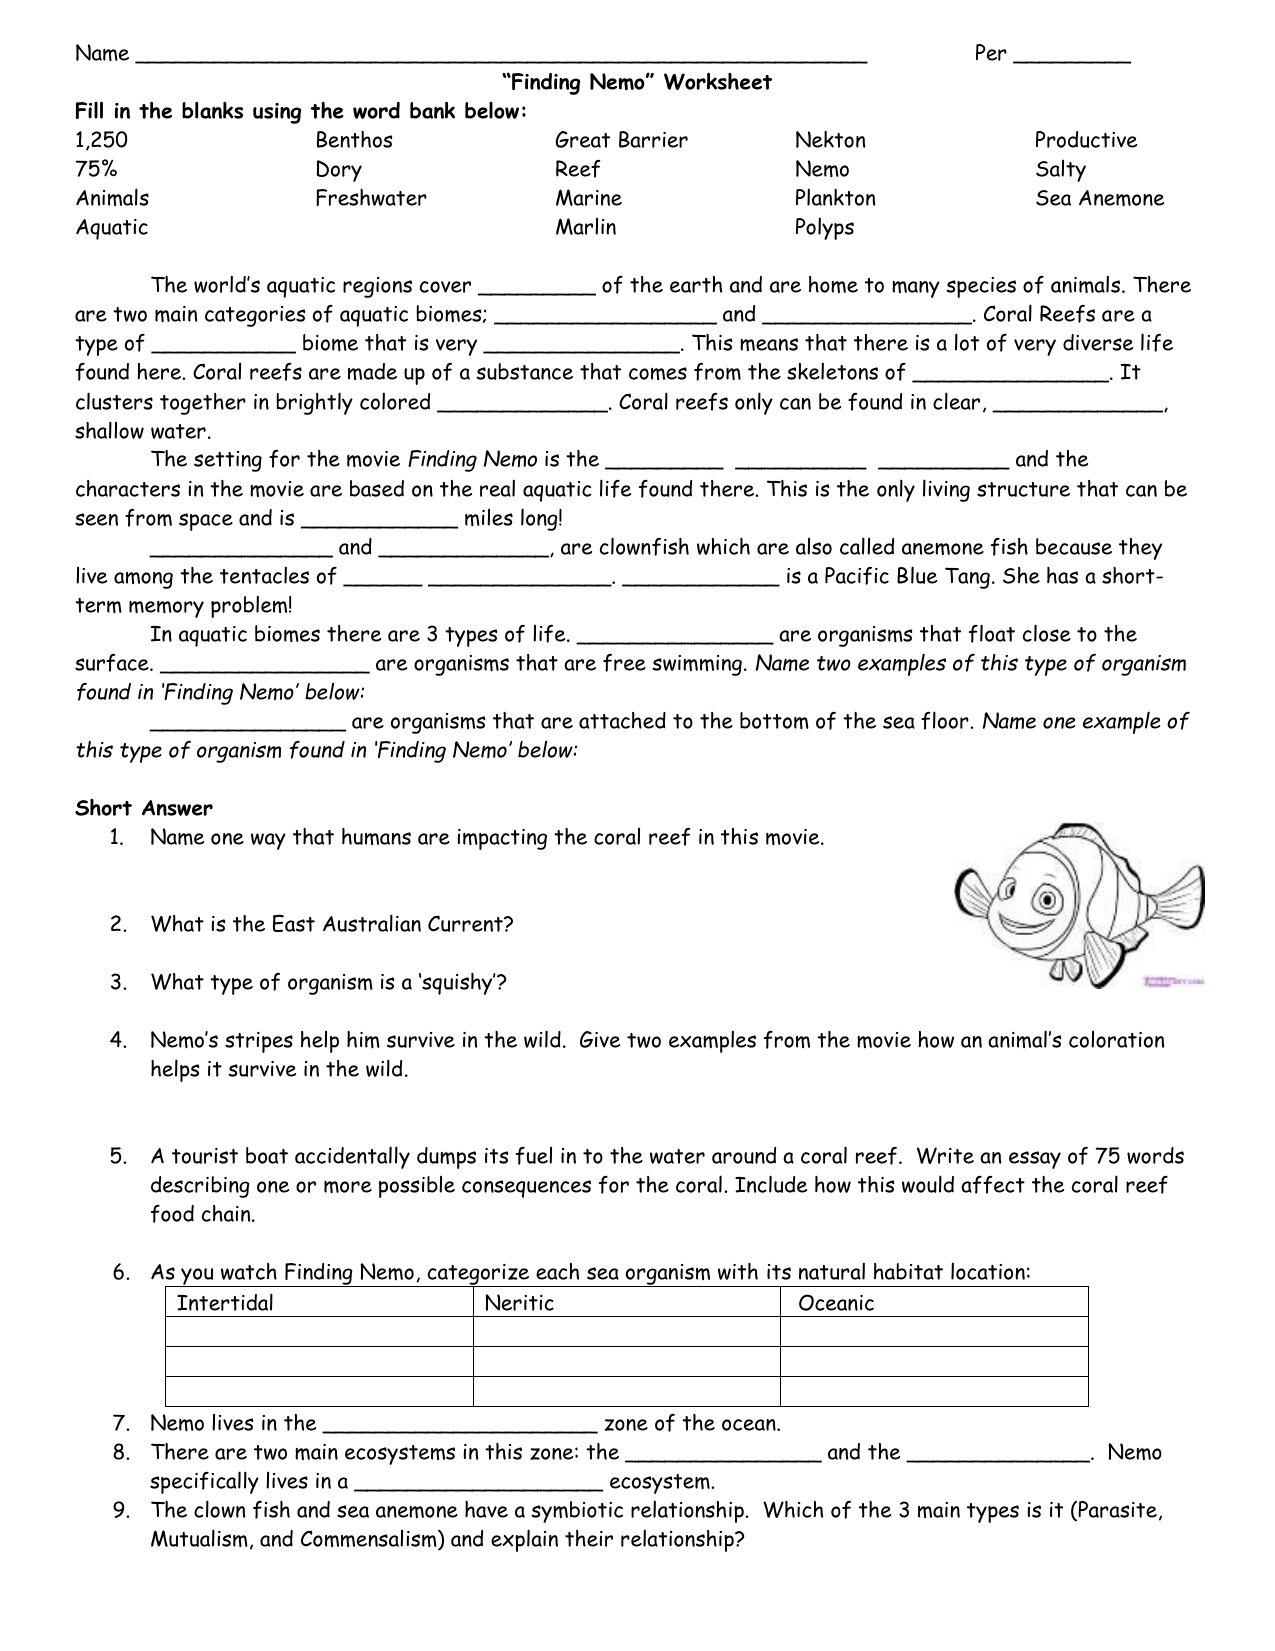 water-and-aquatic-ecosystems-worksheet-answers-ivuyteq